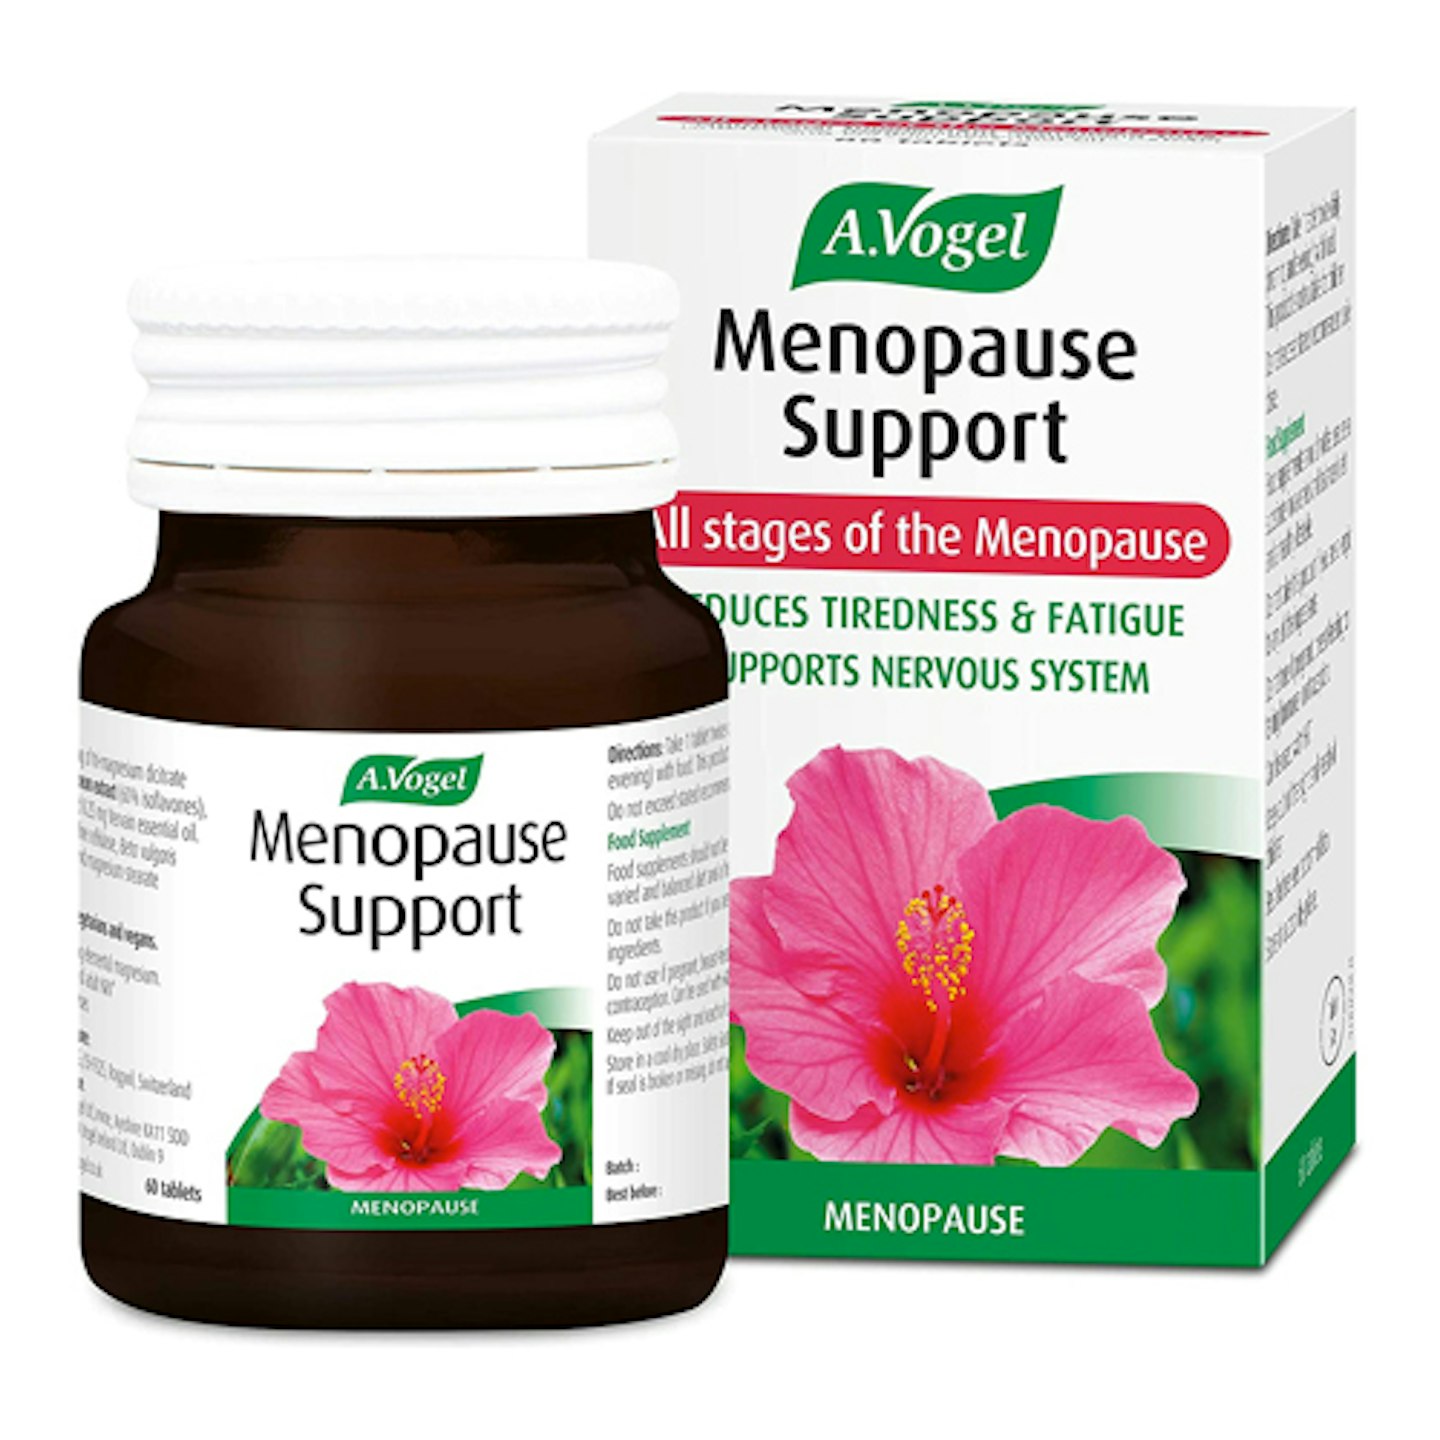 A.Vogel Menopause Support